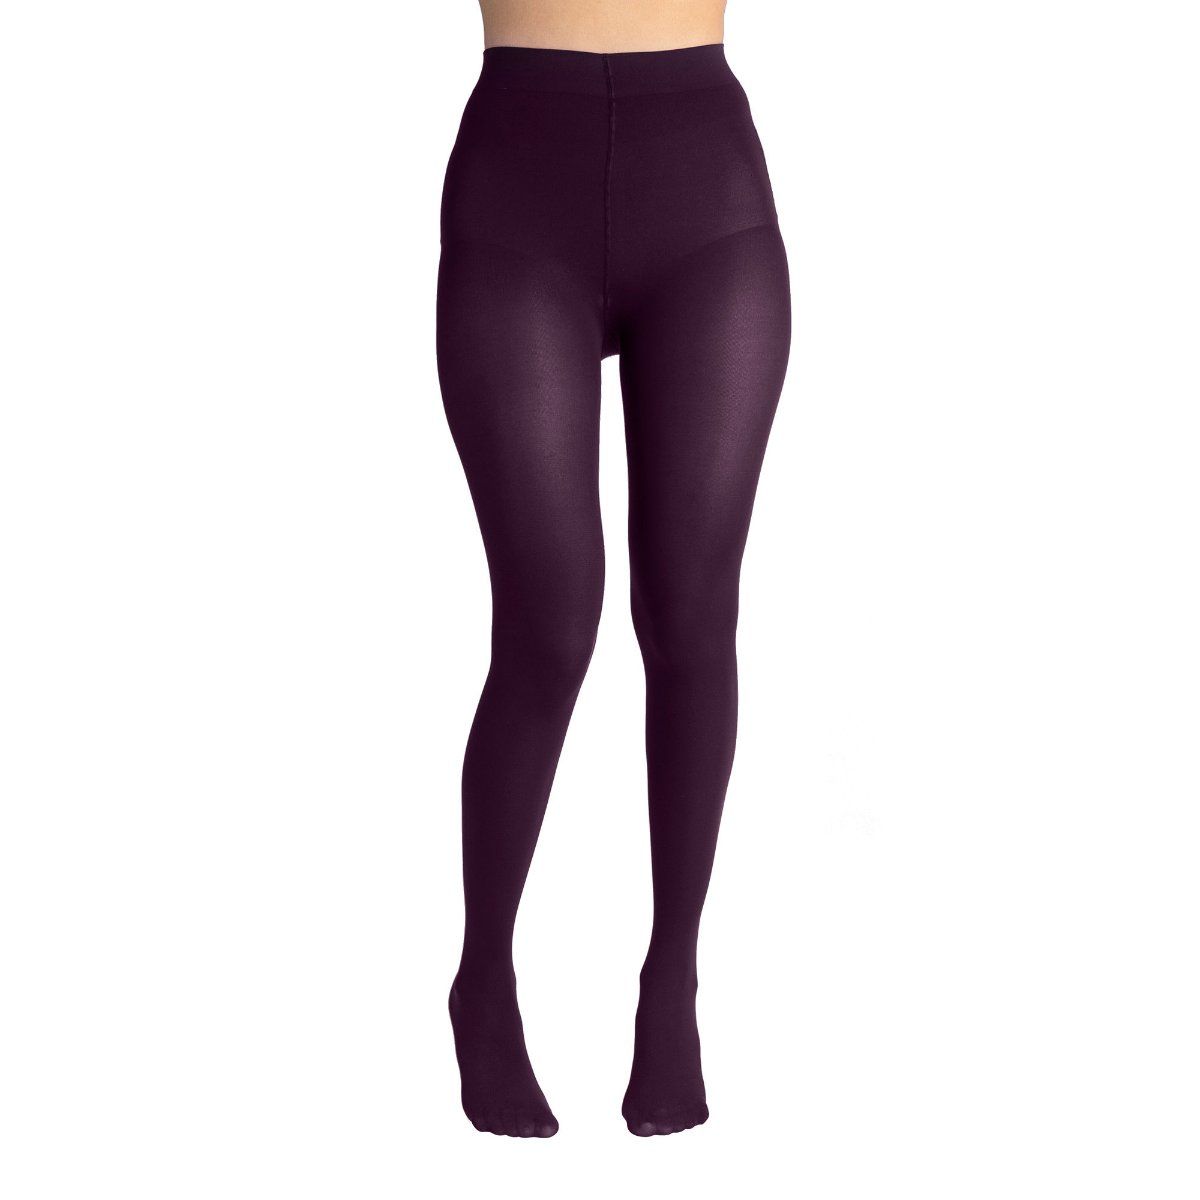 Theater Violette Stockings - Purple: Buy Theater Violette Stockings ...